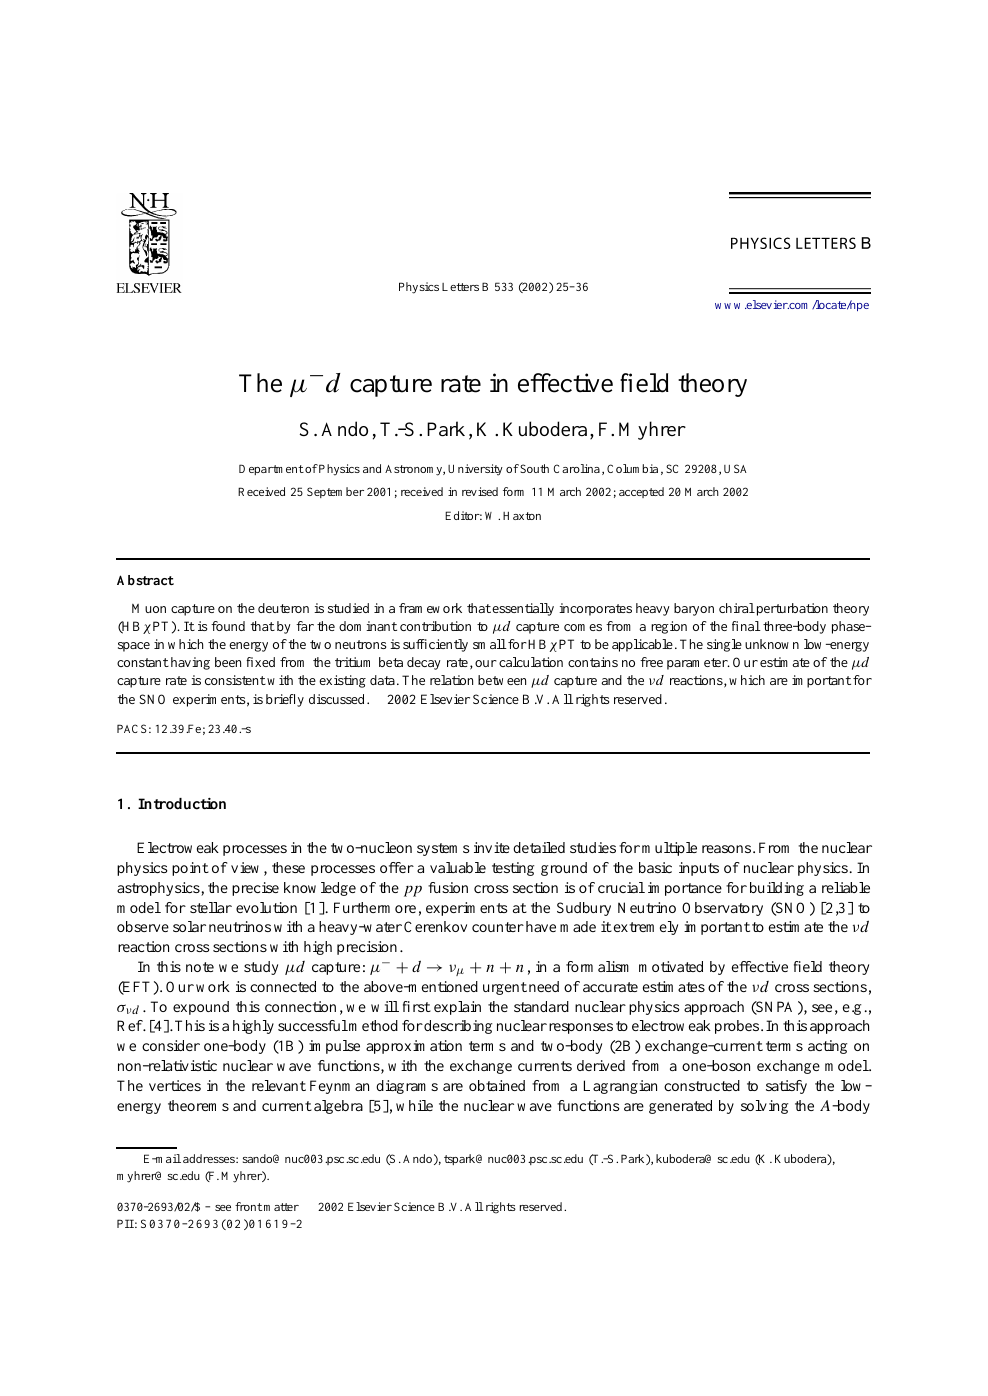 The M D Capture Rate In Effective Field Theory Topic Of Research Paper In Physical Sciences Download Scholarly Article Pdf And Read For Free On Cyberleninka Open Science Hub